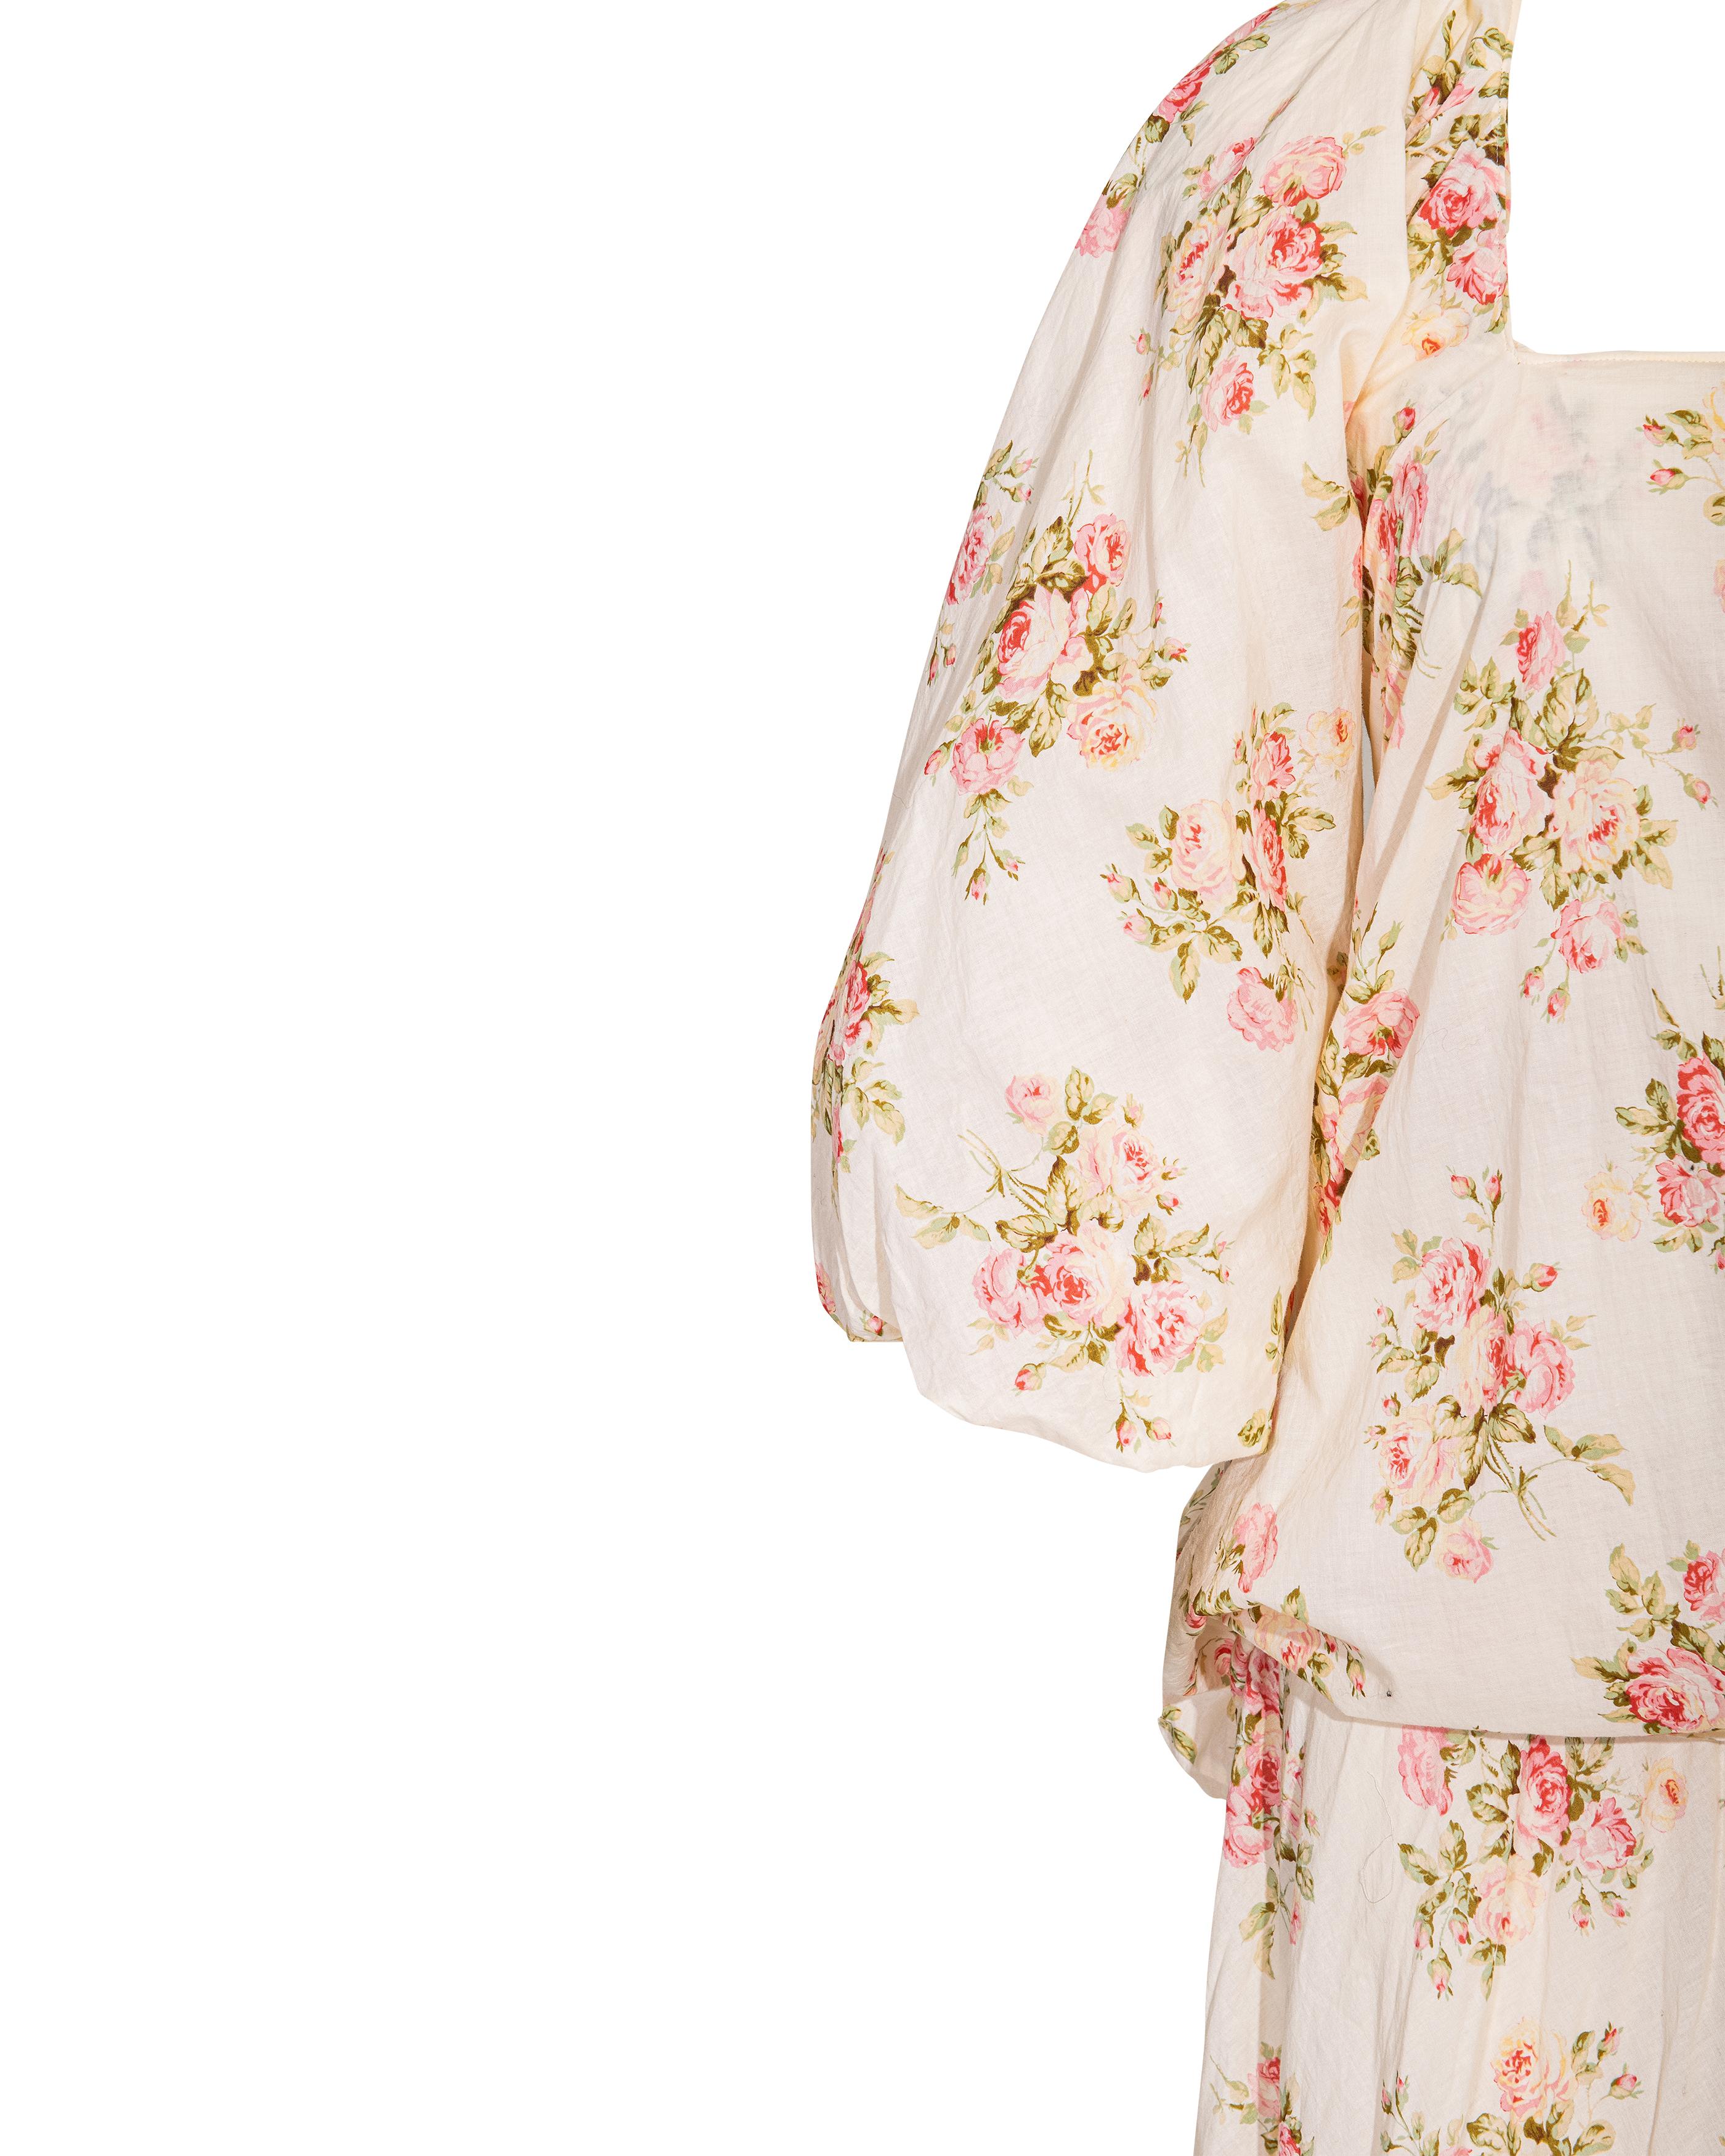 S/S 2008 Junya Watanabe Ecru Cotton Dress with Pink Floral Pattern For Sale 3